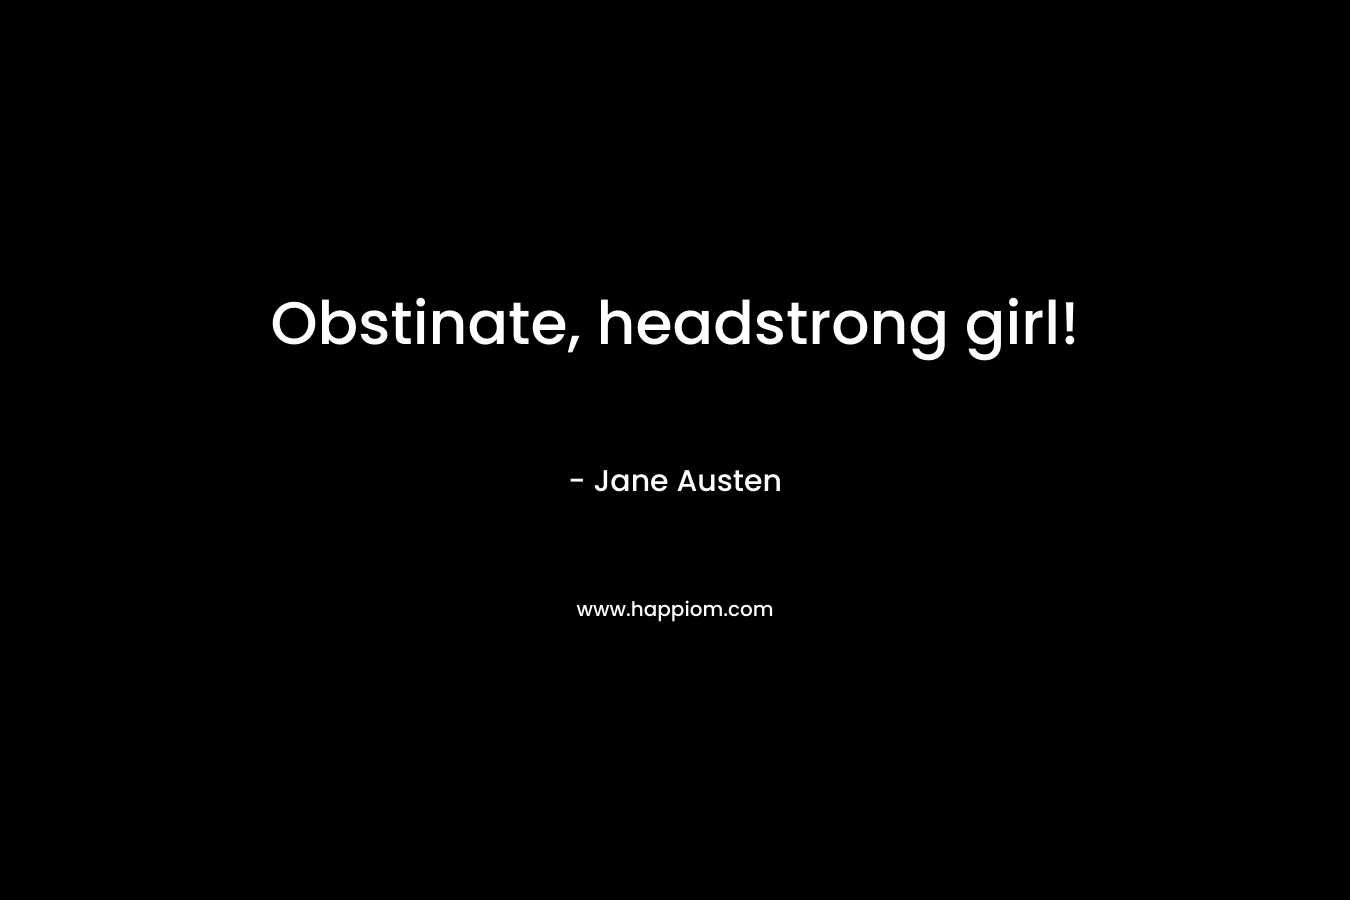 Obstinate, headstrong girl!